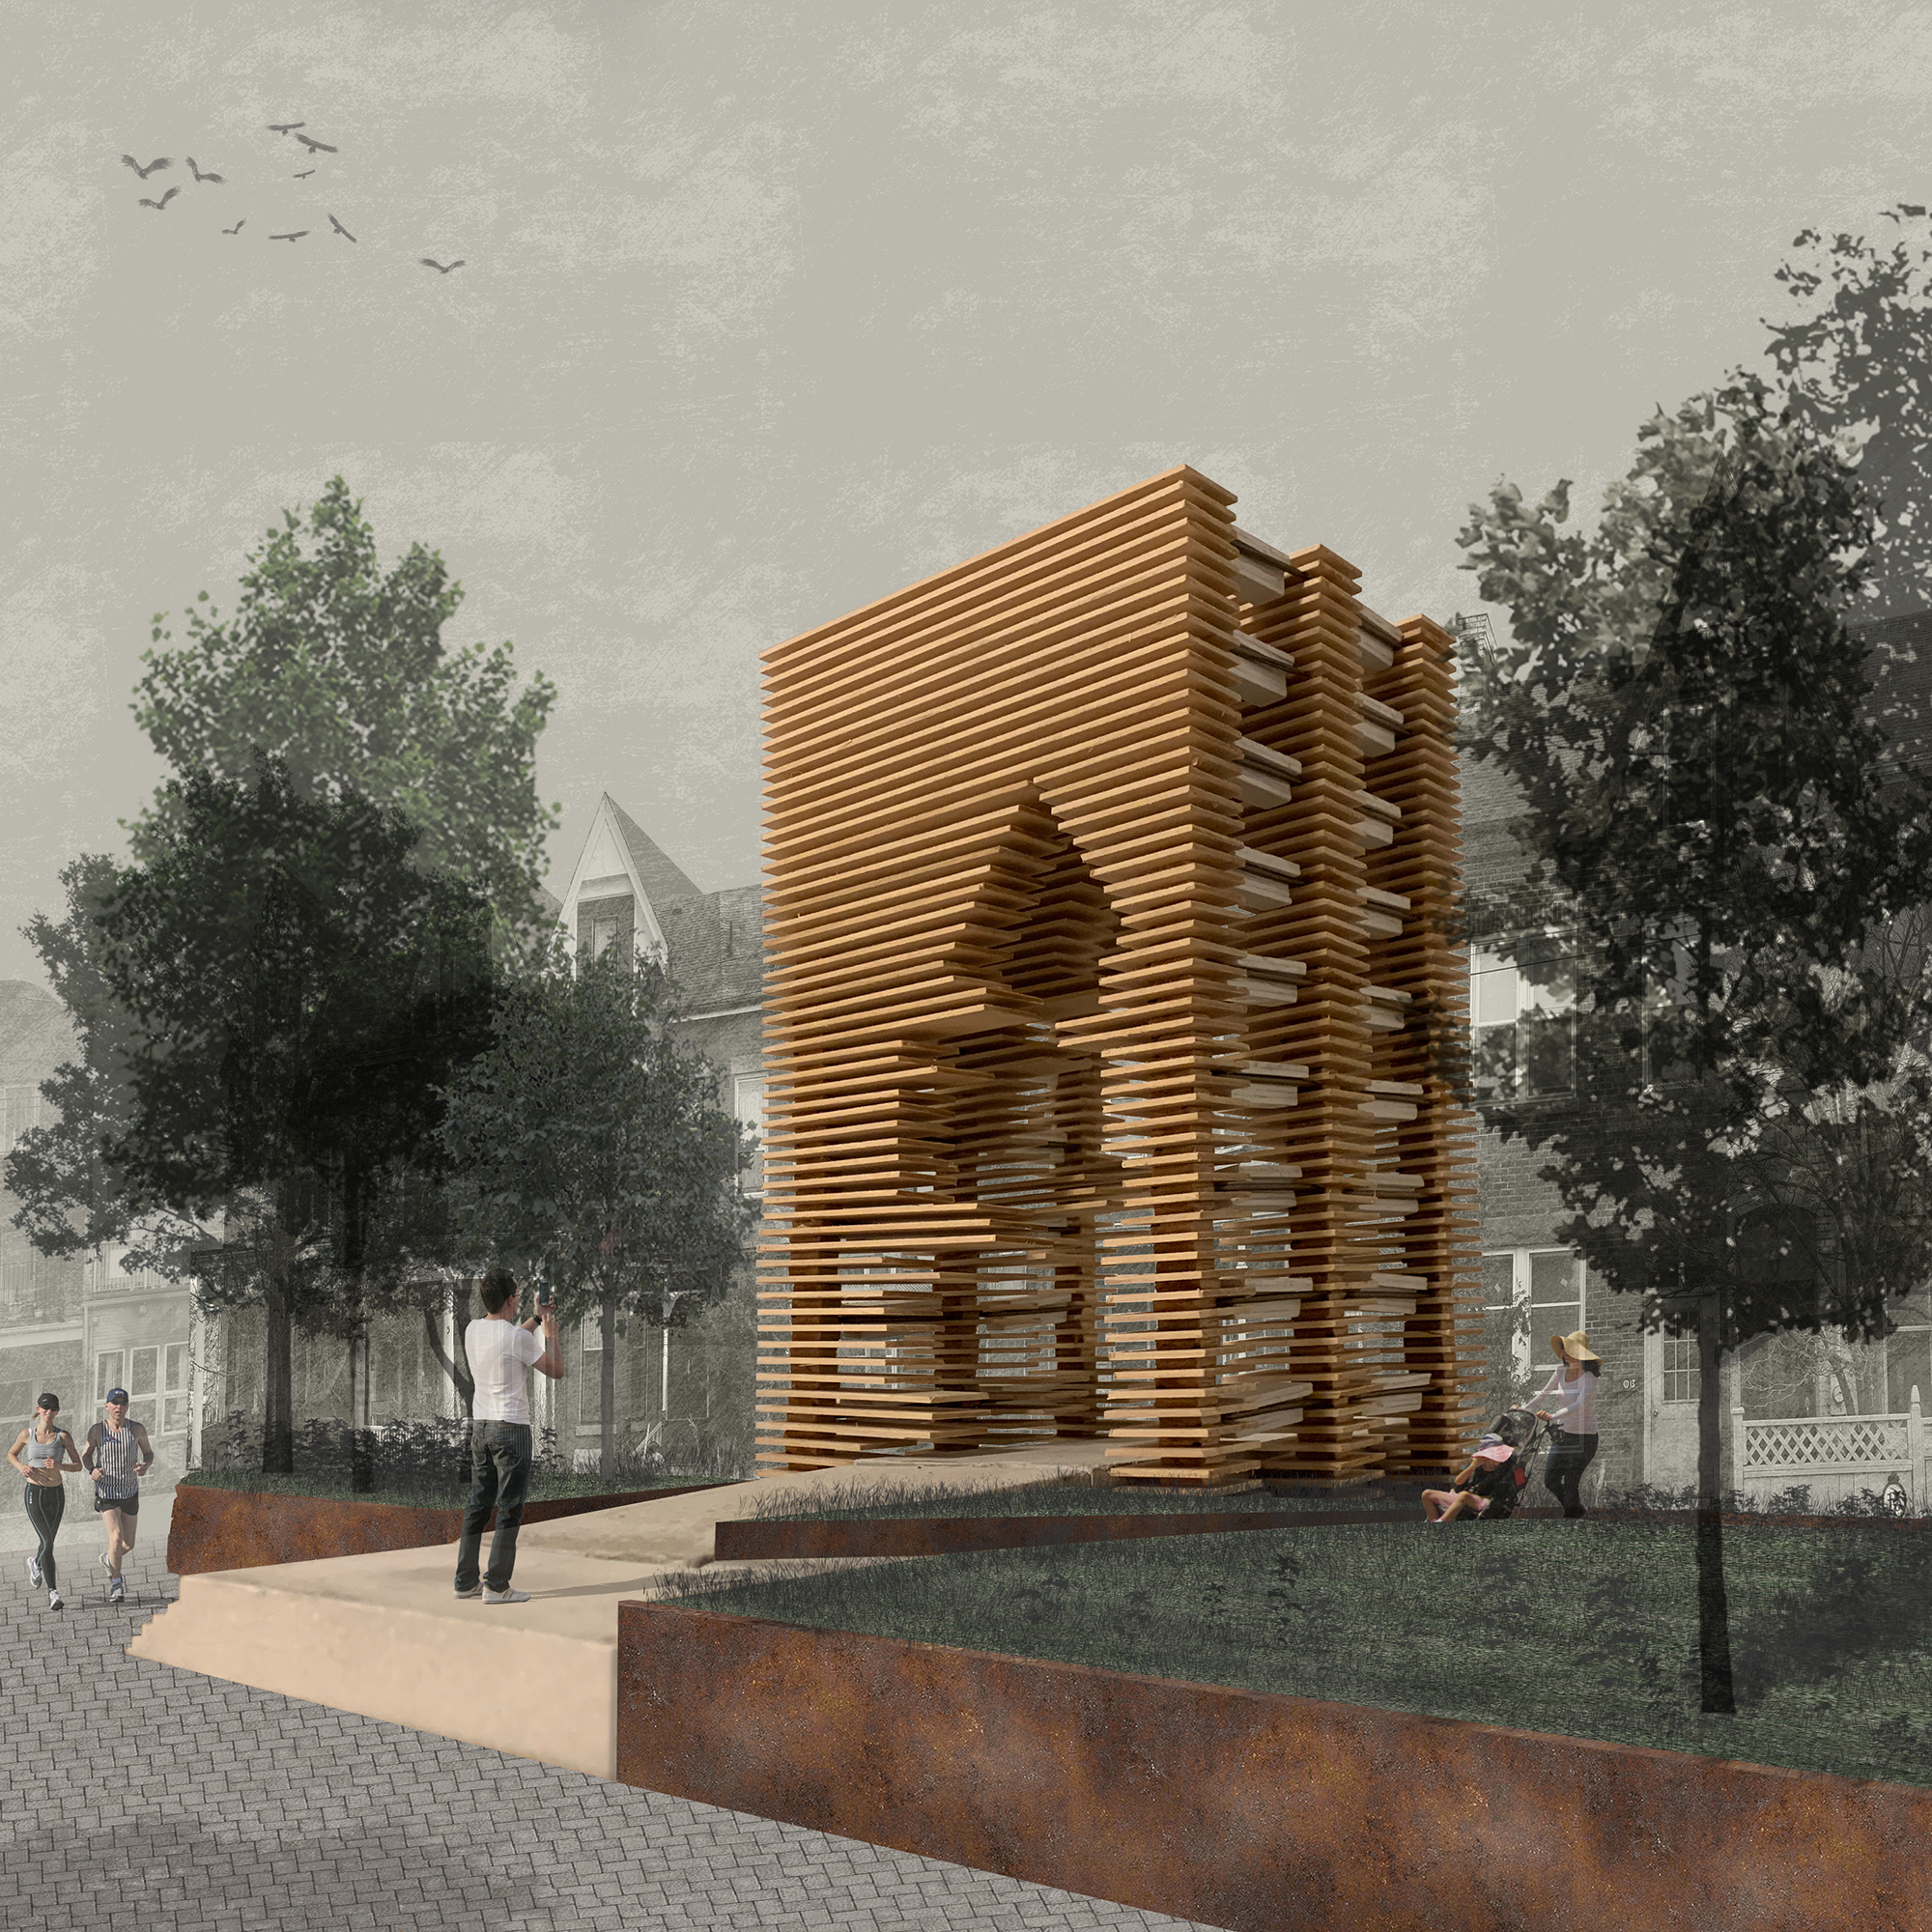 A rendering of Massimo Giannone's pavilion